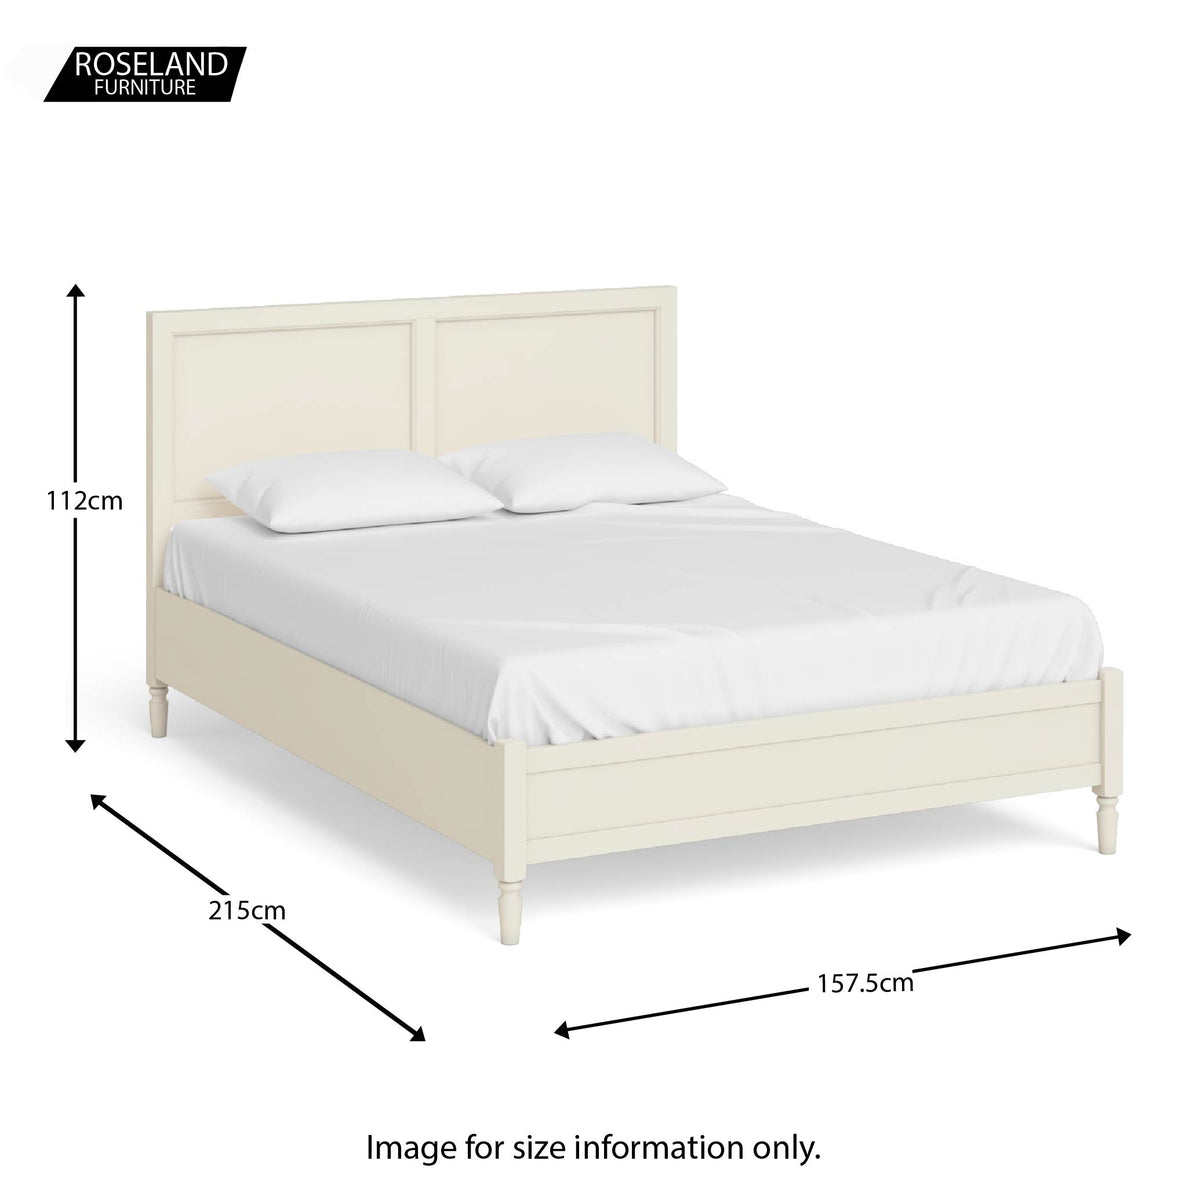 Mulsanne Cream 5ft King Size Bed Frame size guide